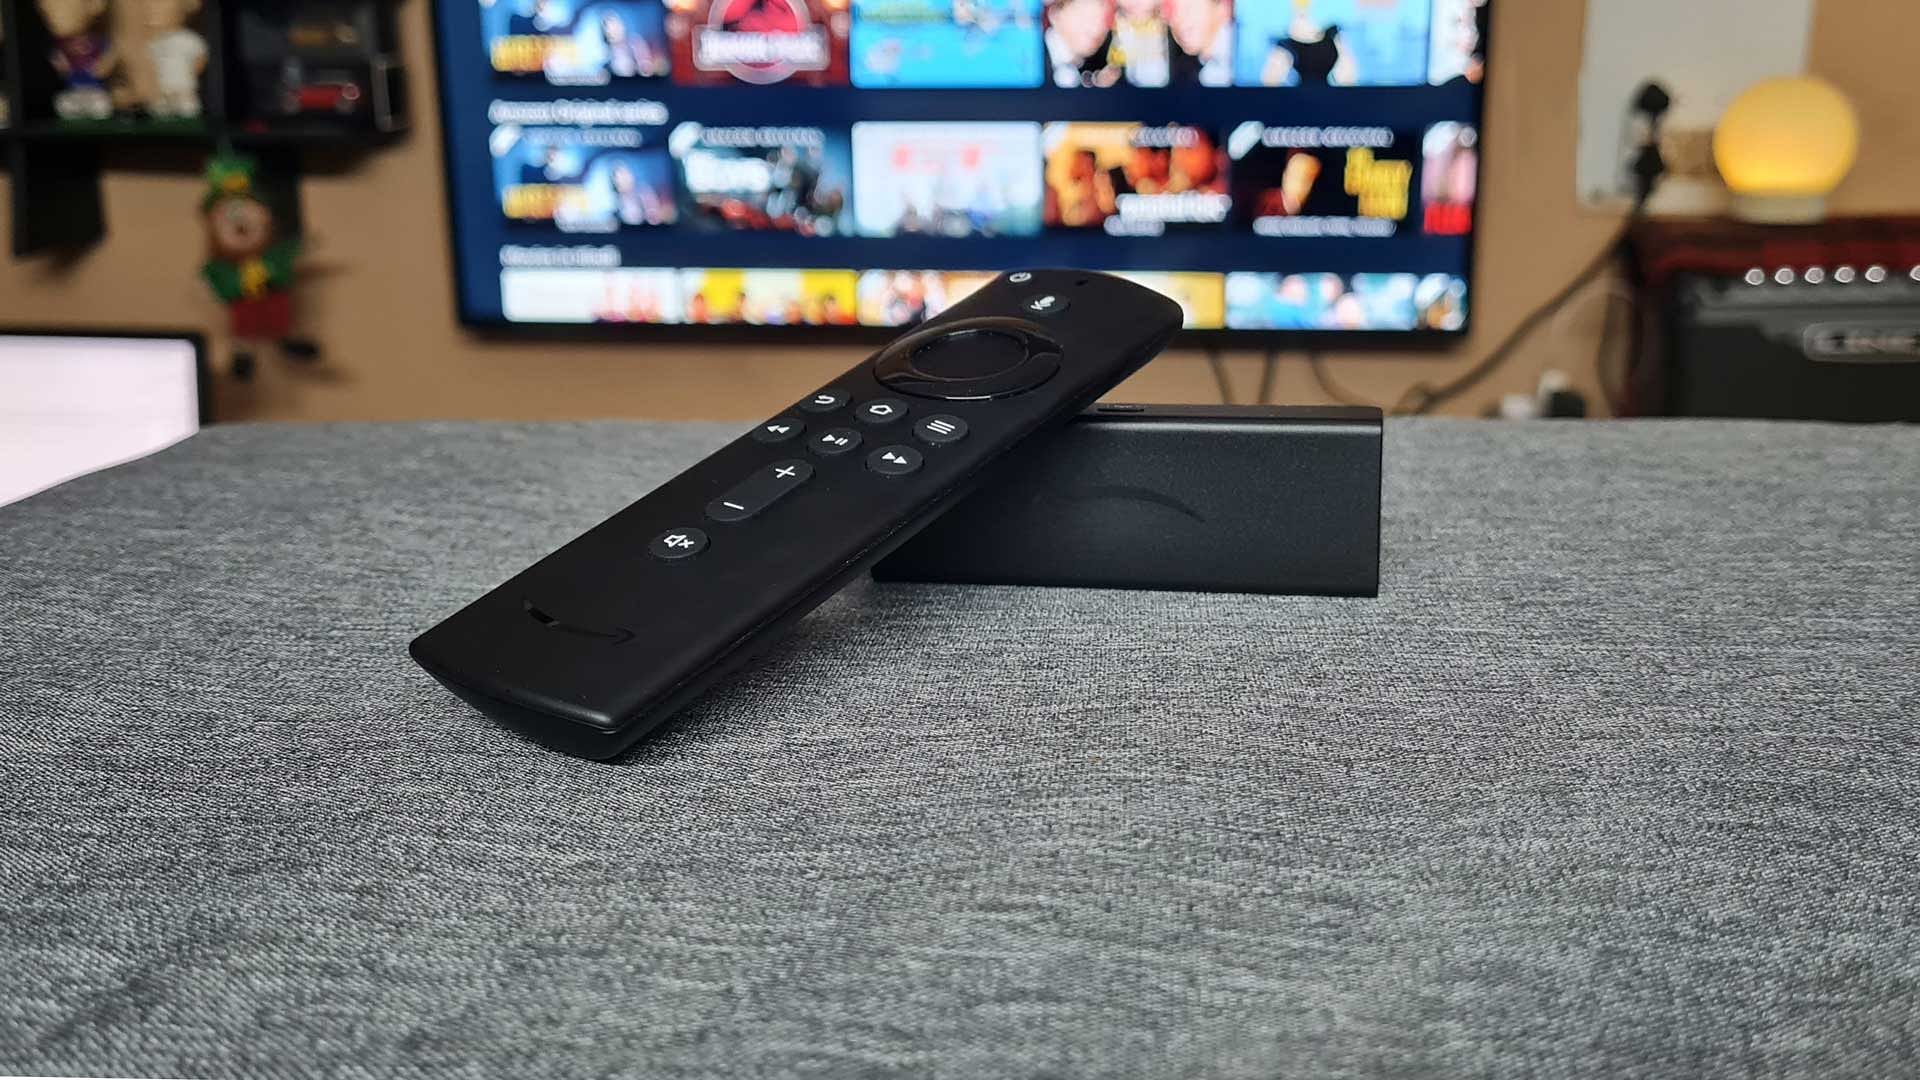 The new Amazon Fire TV Stick. Image used for representational purpose.